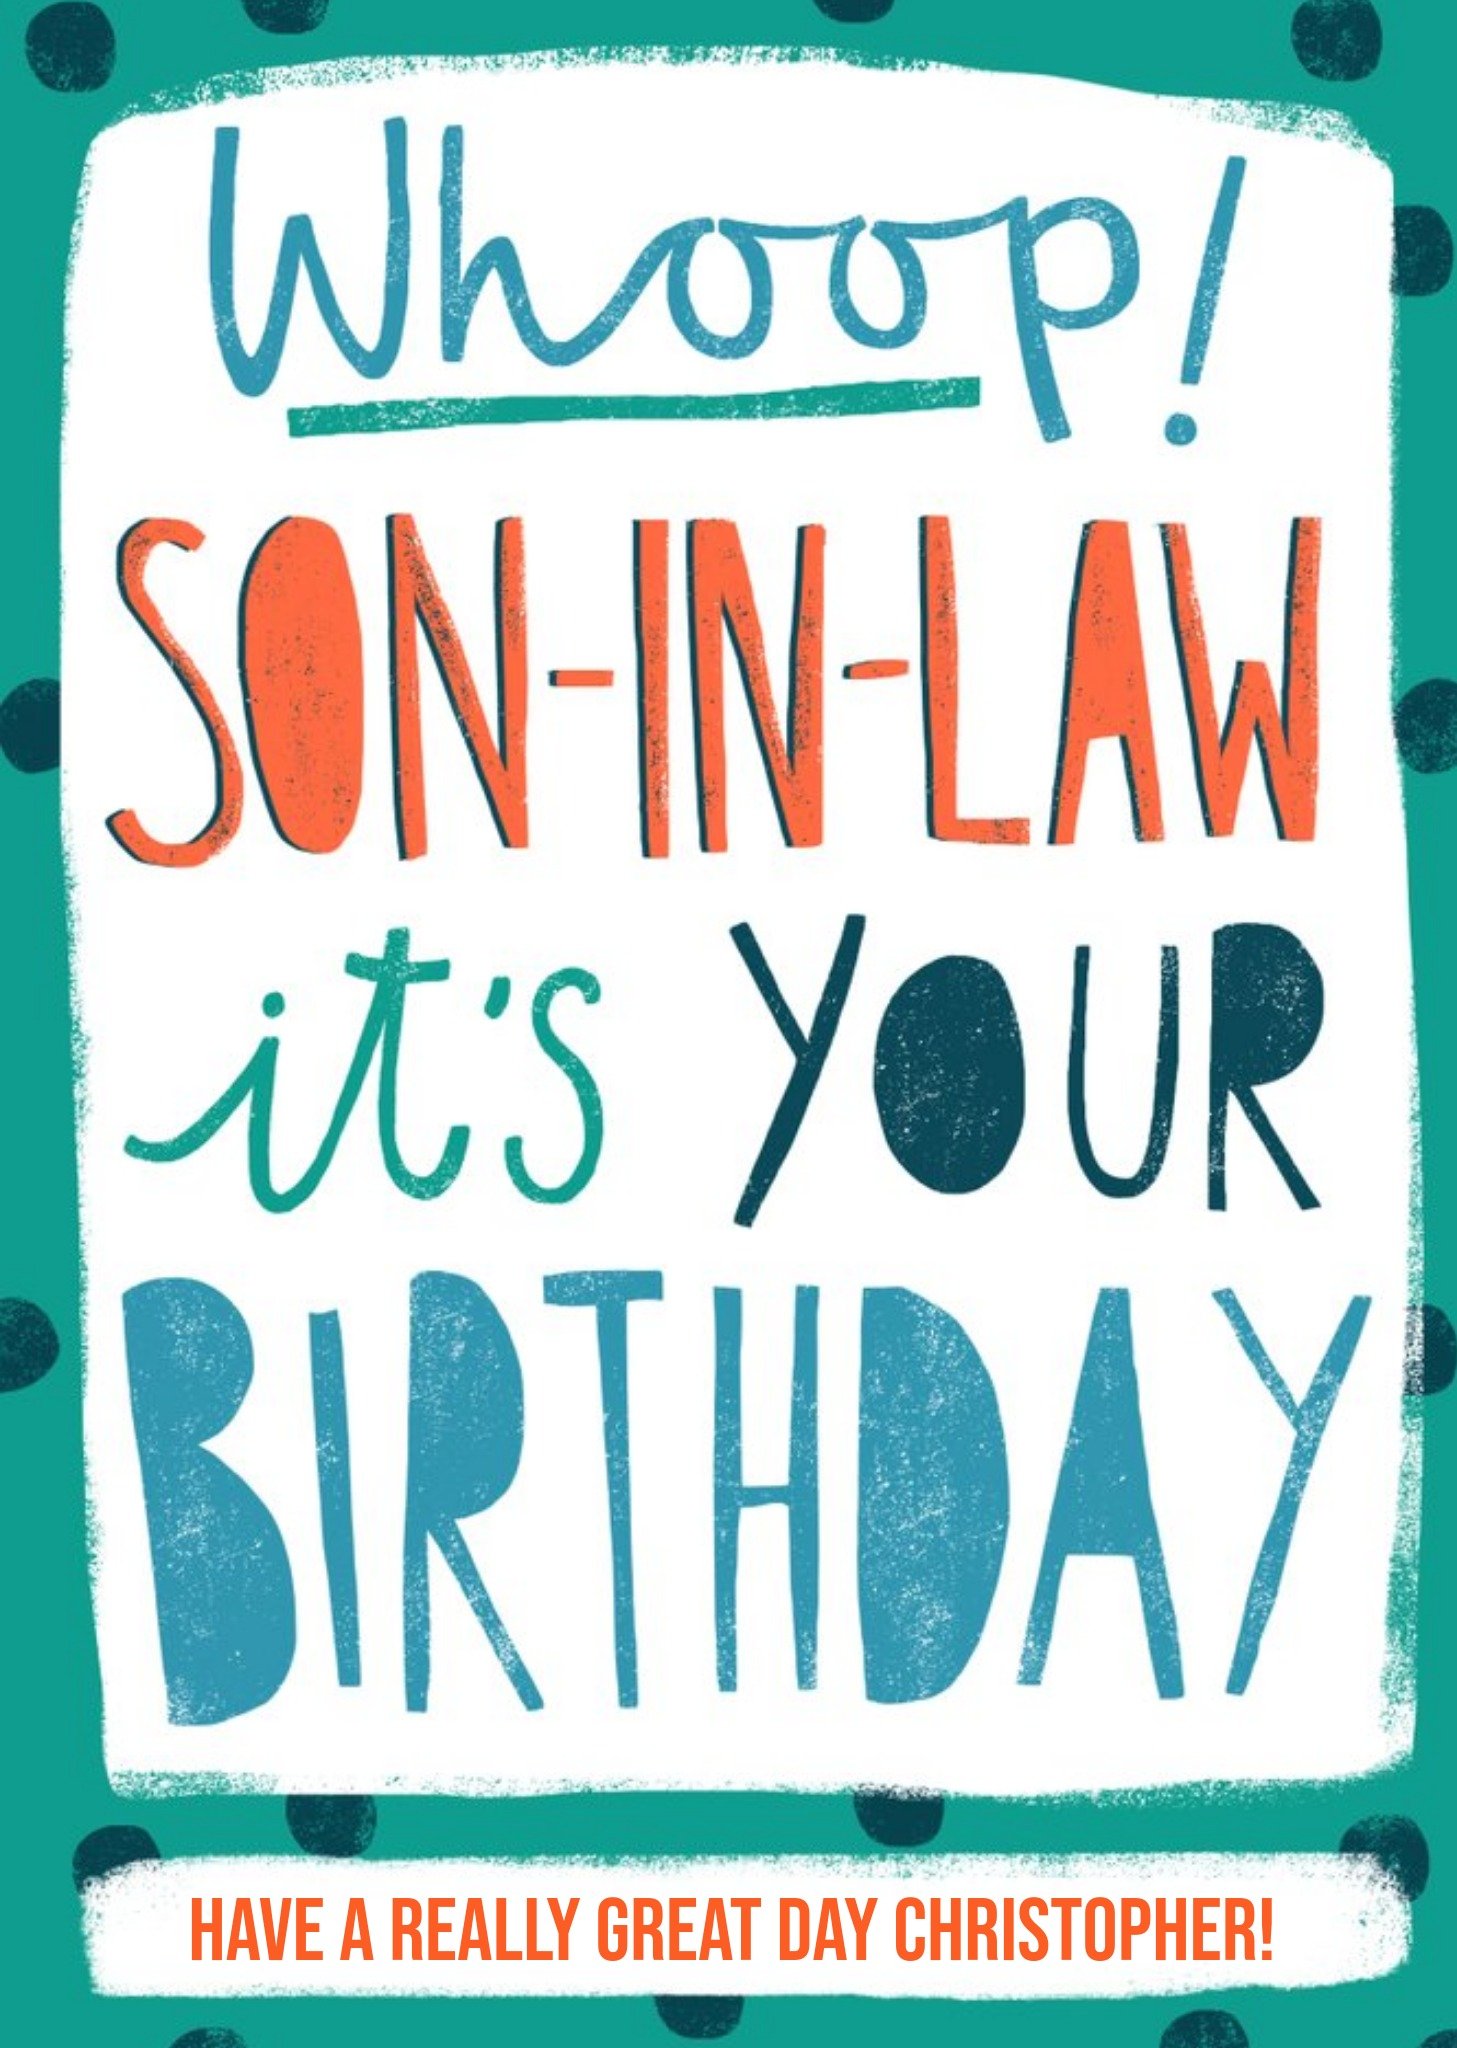 Moonpig Whoop Son-In-Law It's Your Birthday - Birthday Card Ecard